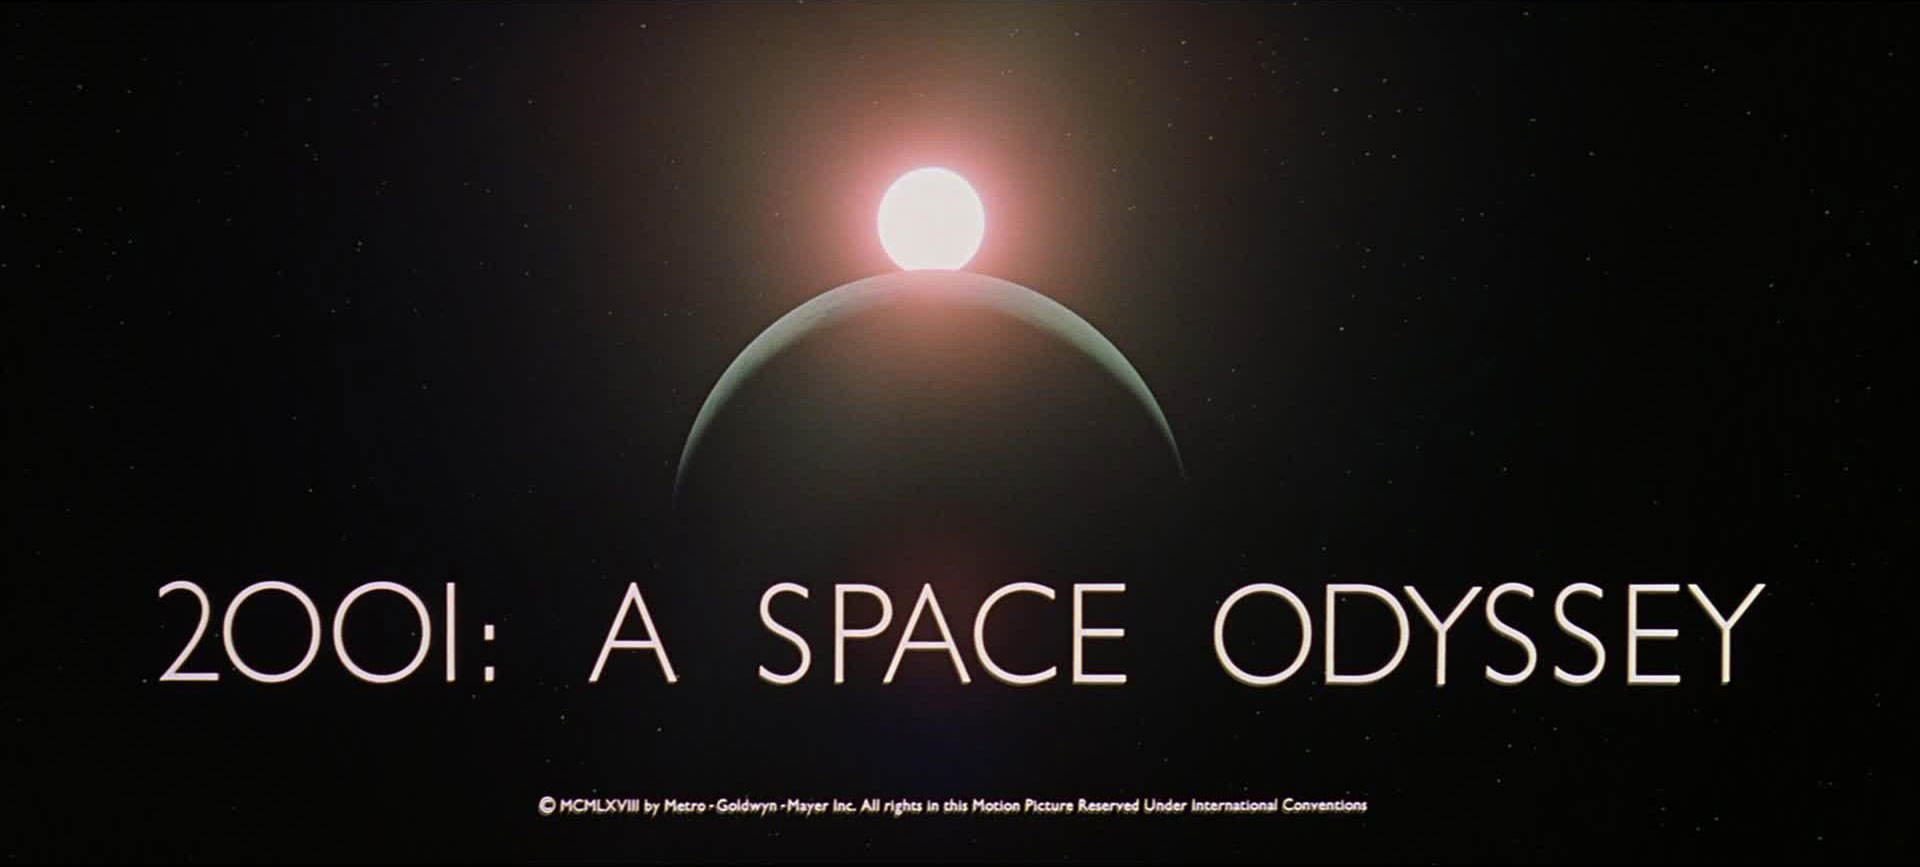 2001-a-space-odyssey-blu-ray-movie-title-large.jpg